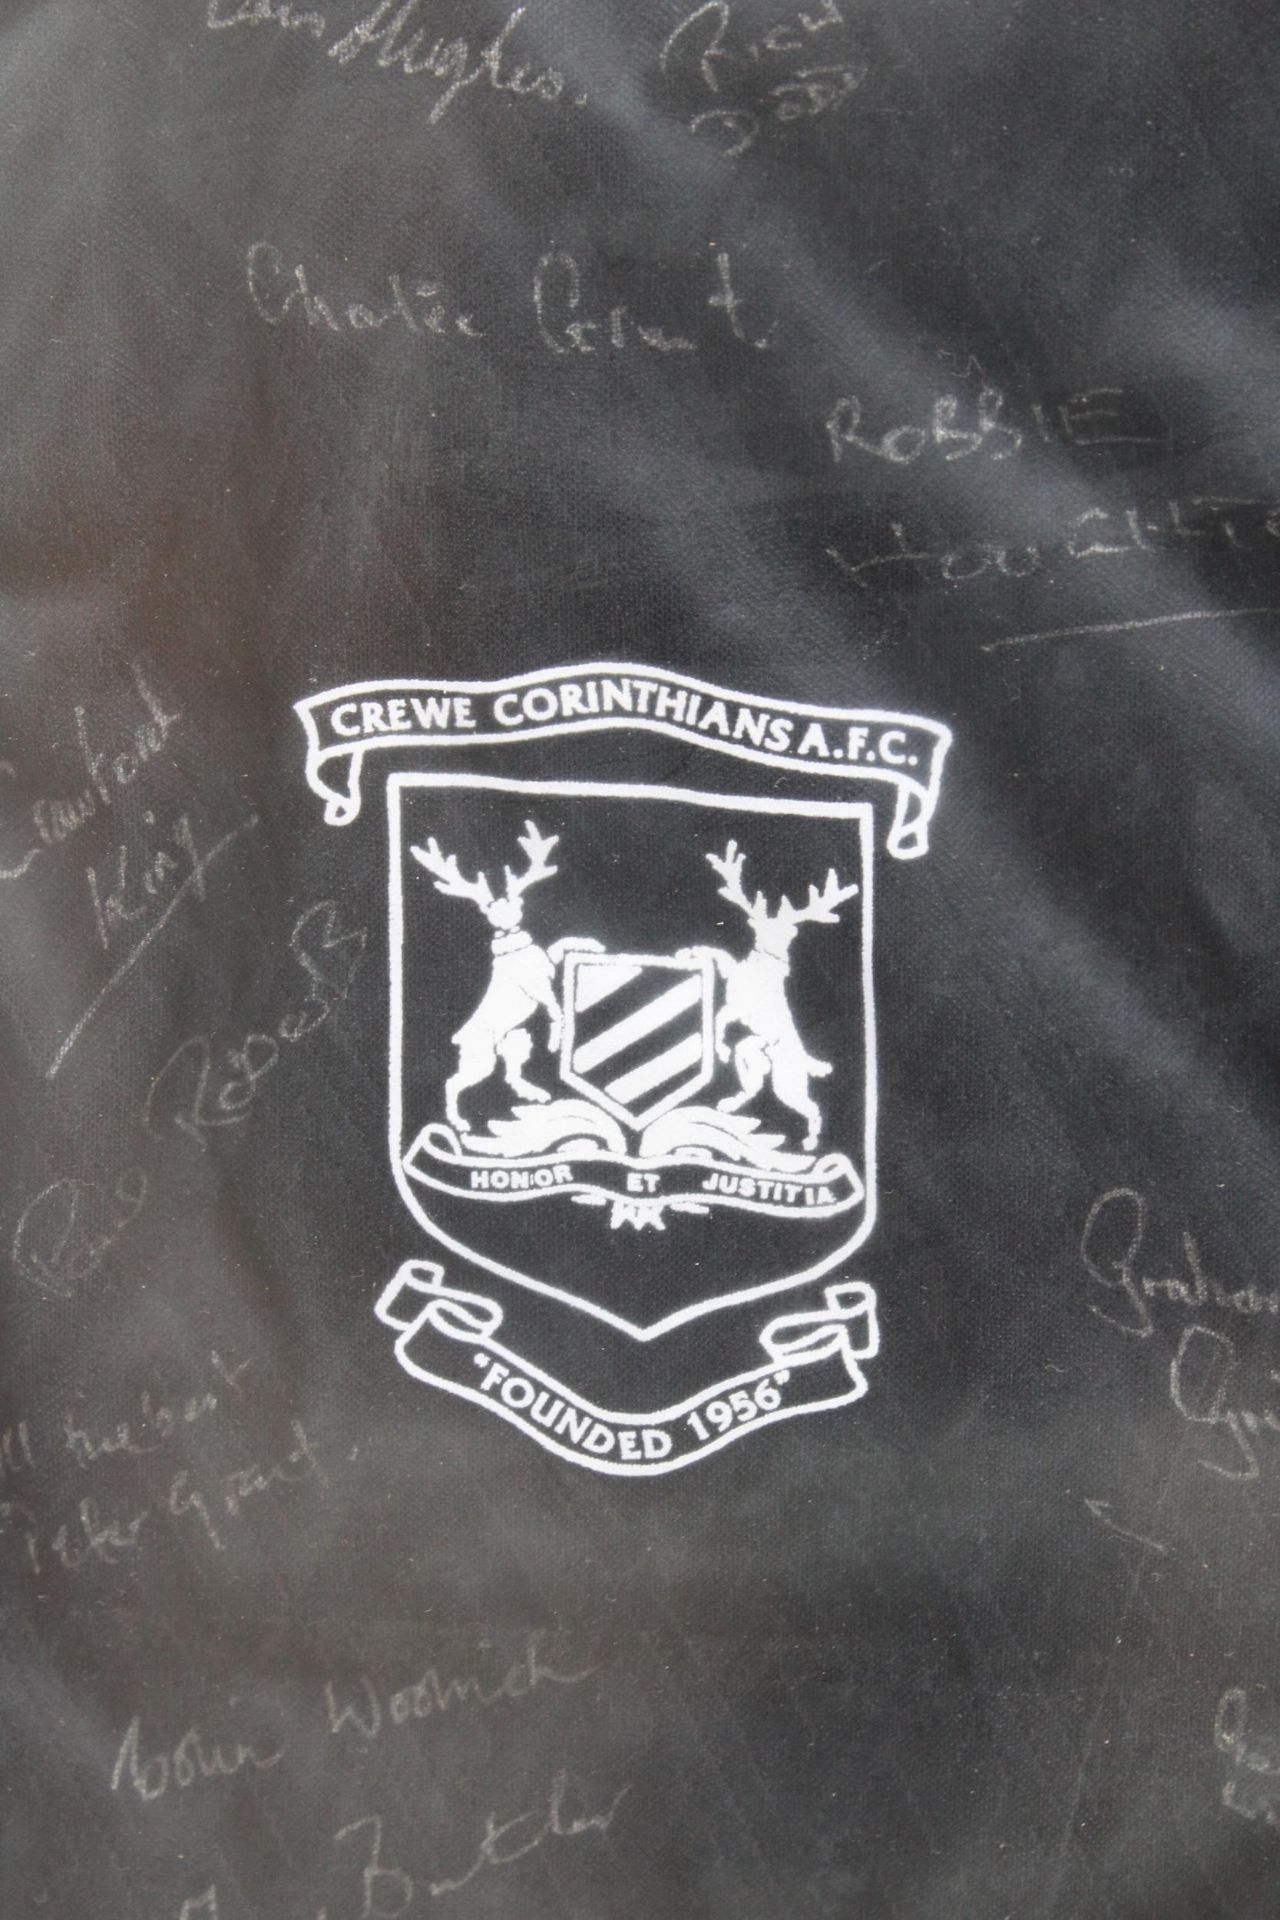 A FRAMED CREWE CORINTHIANS SHIRT WITH SIGNATURES - Image 5 of 5